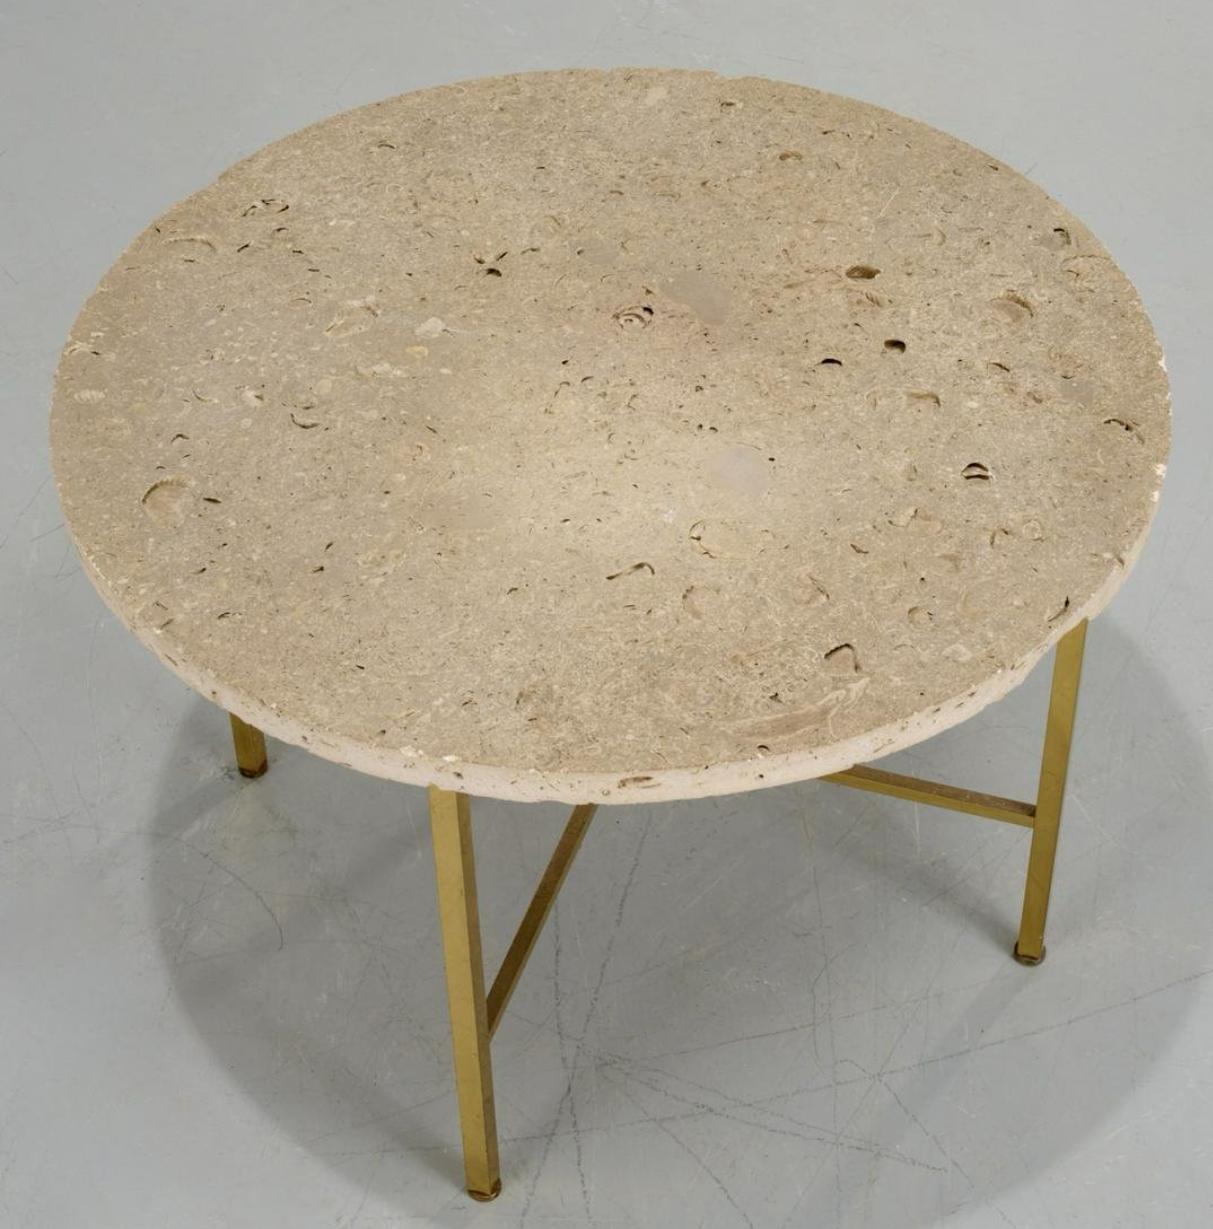 Harvey Probber, coquina and brass coffee table, c. 1950s, USA, round stone top, architectural polished brass base with square tube legs joined by stretchers, model 917B, 20